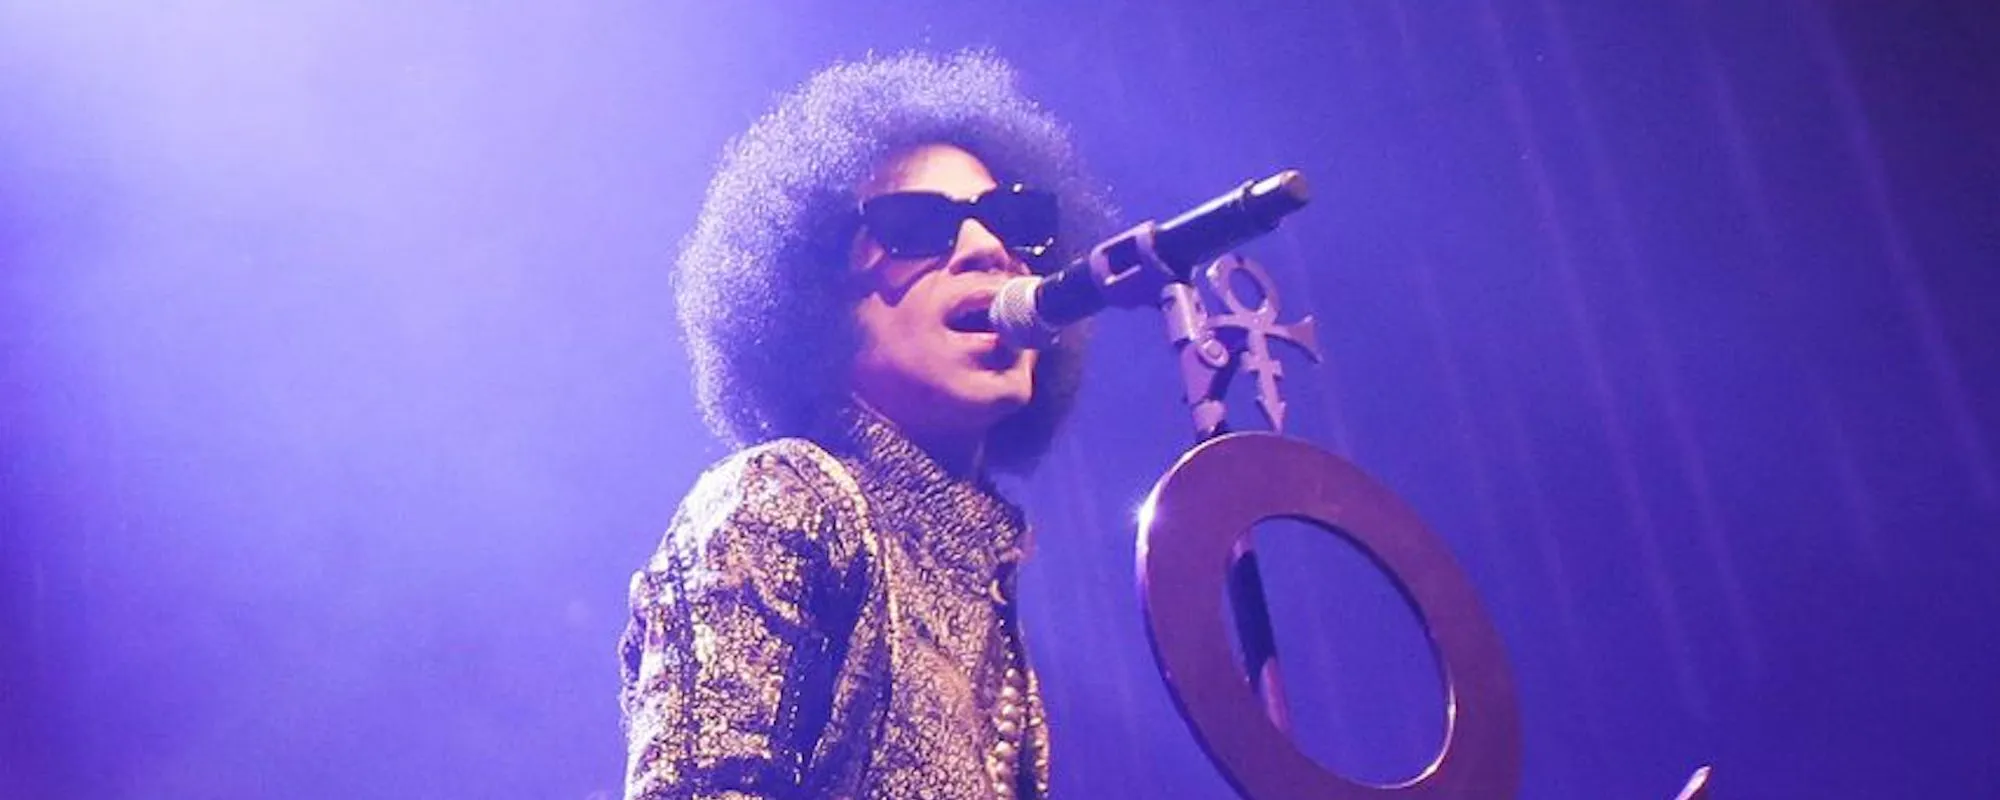 The Story Behind Why Prince Refused to Allow Elvis Costello to Record “Pop Life”